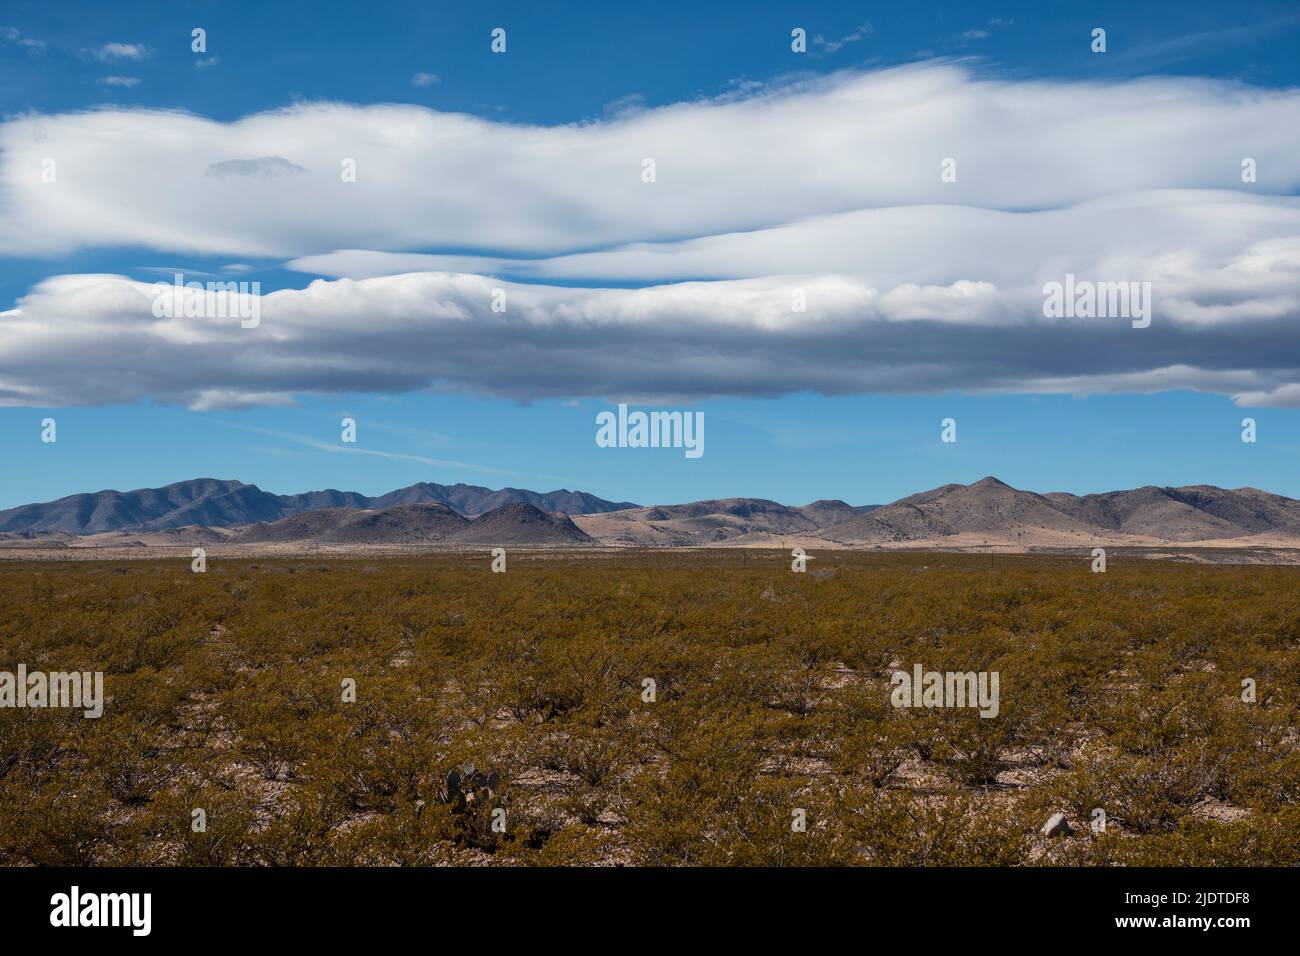 USA, New Mexico, Cuchillo, Clouds over desert landscape in Gila National Forest Stock Photo